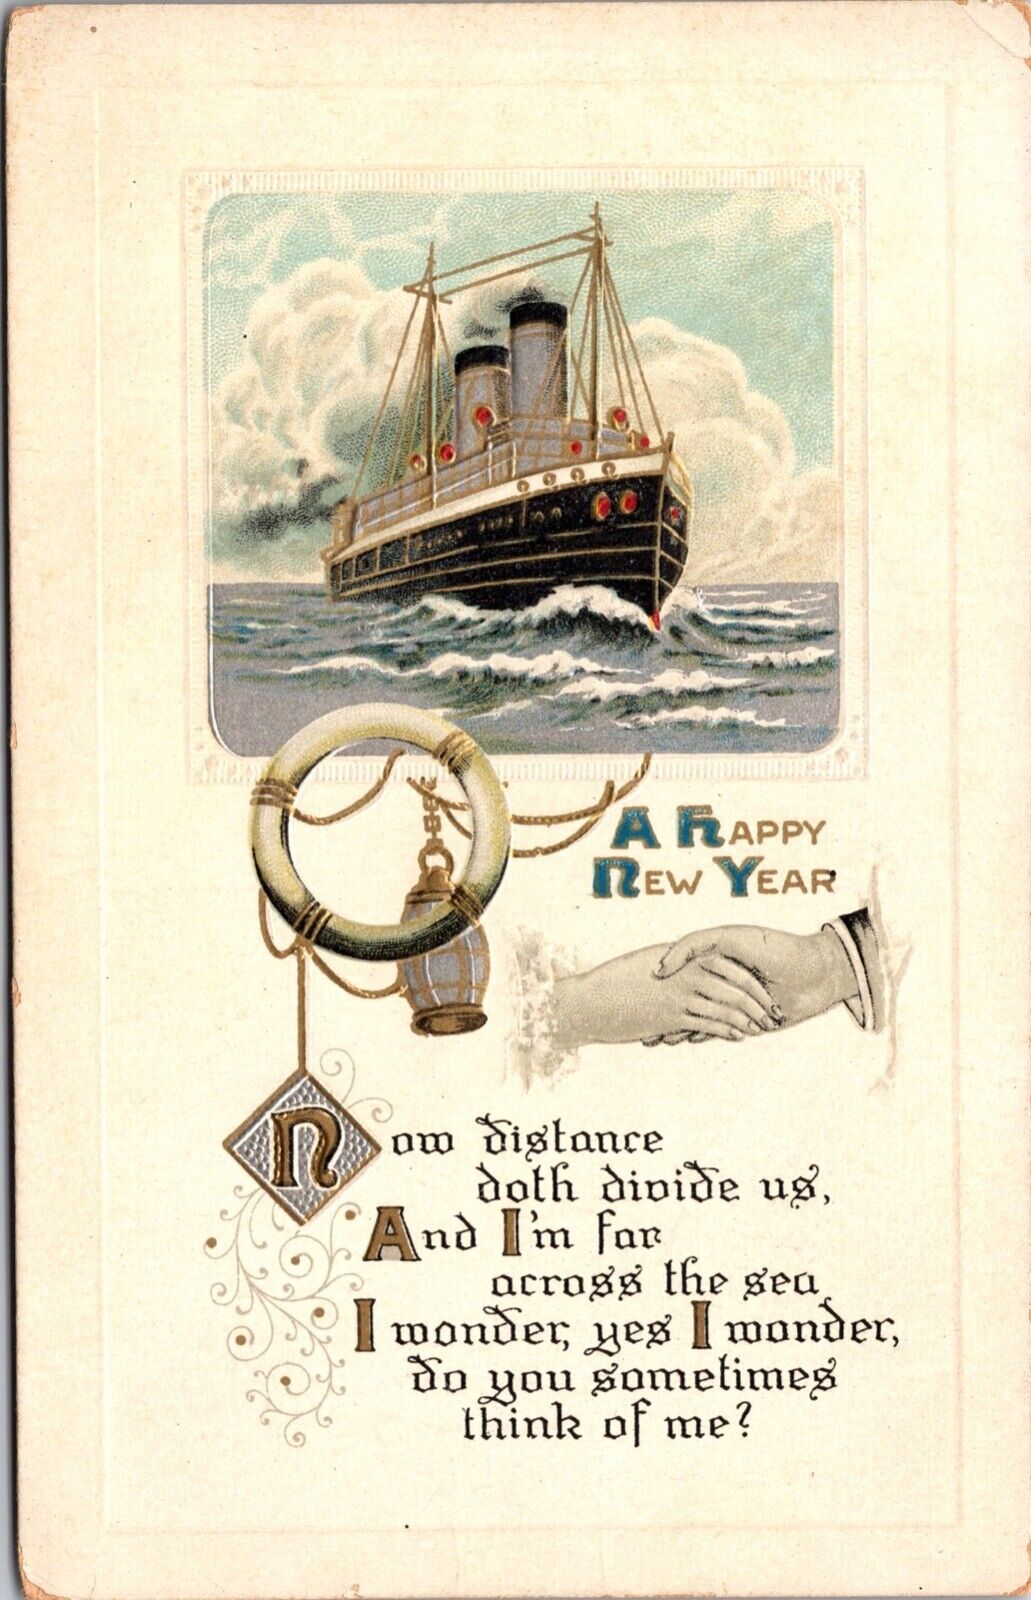 Happy New Year Postcard Man and Woman Shacking Hands Steamship in Ocean, Poem